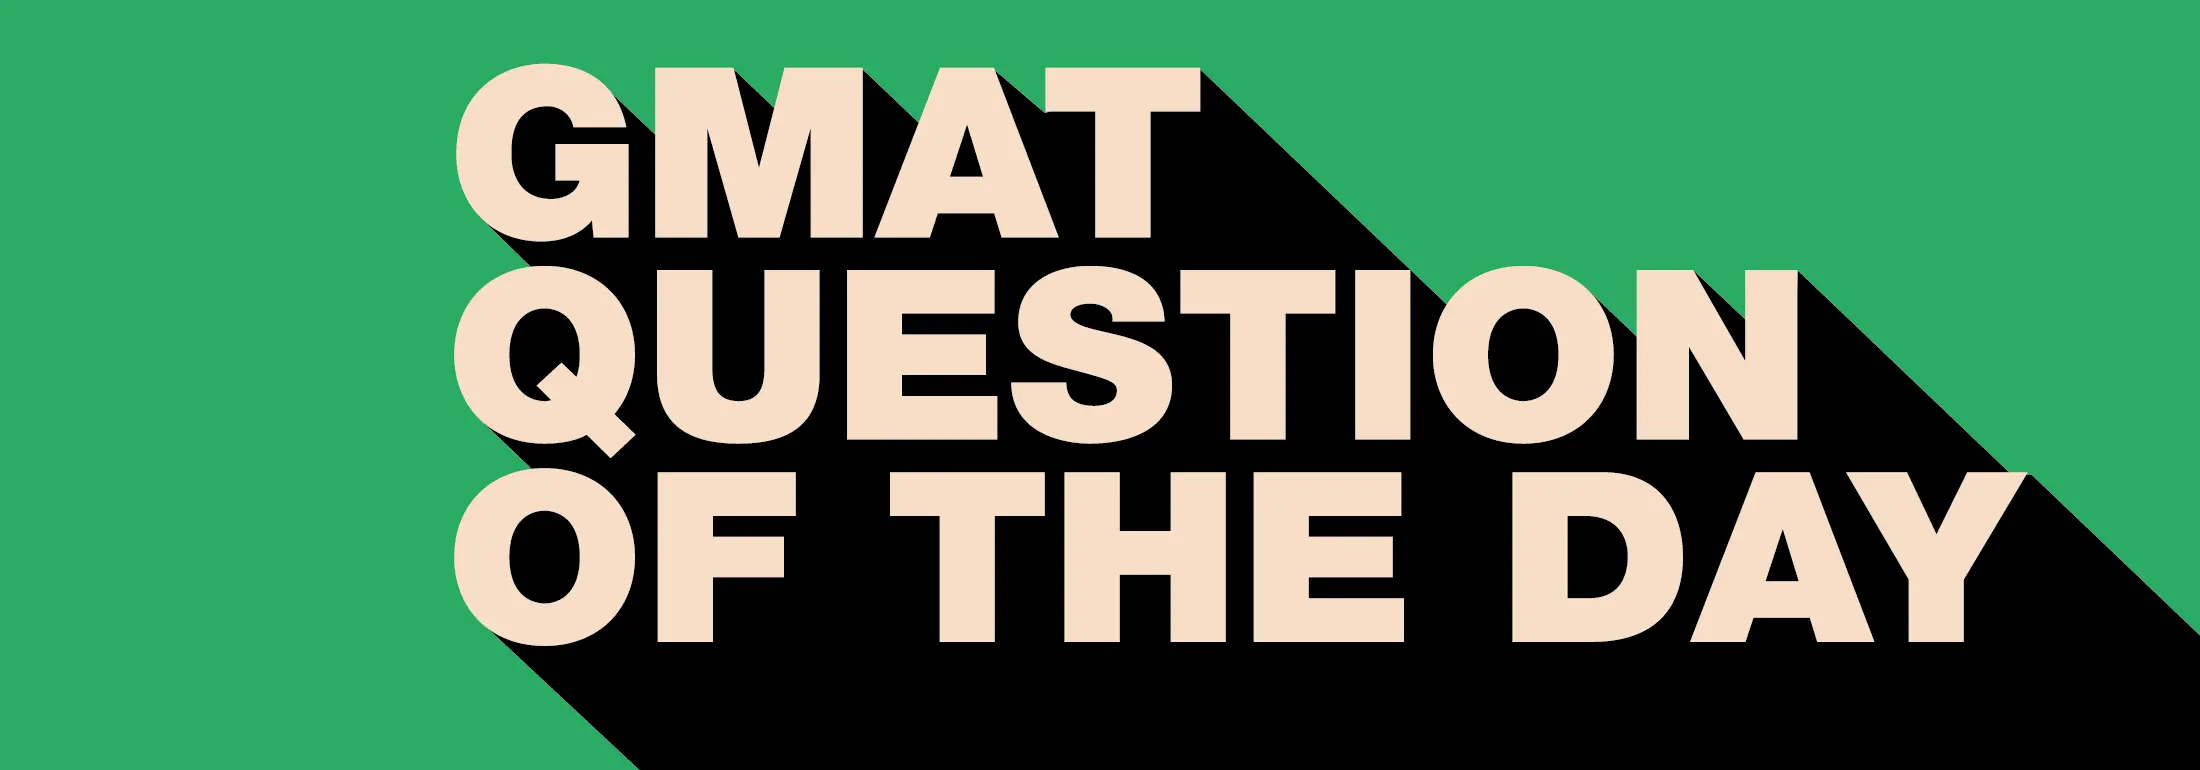 GMAT Question of the Day Work and Rate